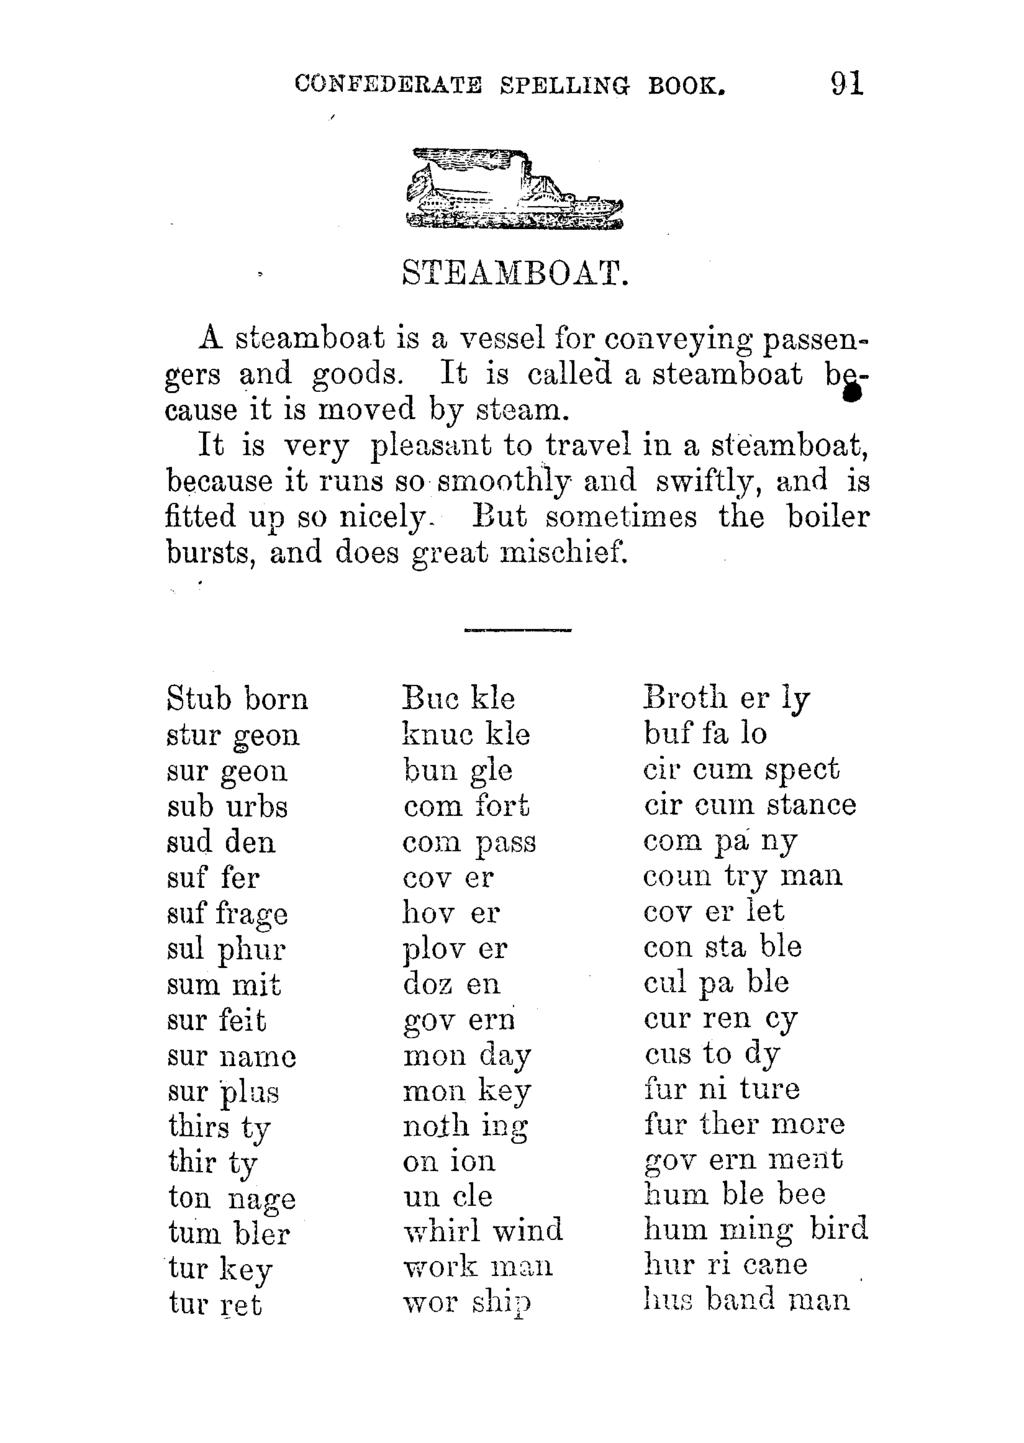 CONFEDERATE SPELLING BOOK. 91 STEAMBOAT. A steamboat is a vessel for conveying passengers and goods. It is called a steamboat because it is moved by steam.